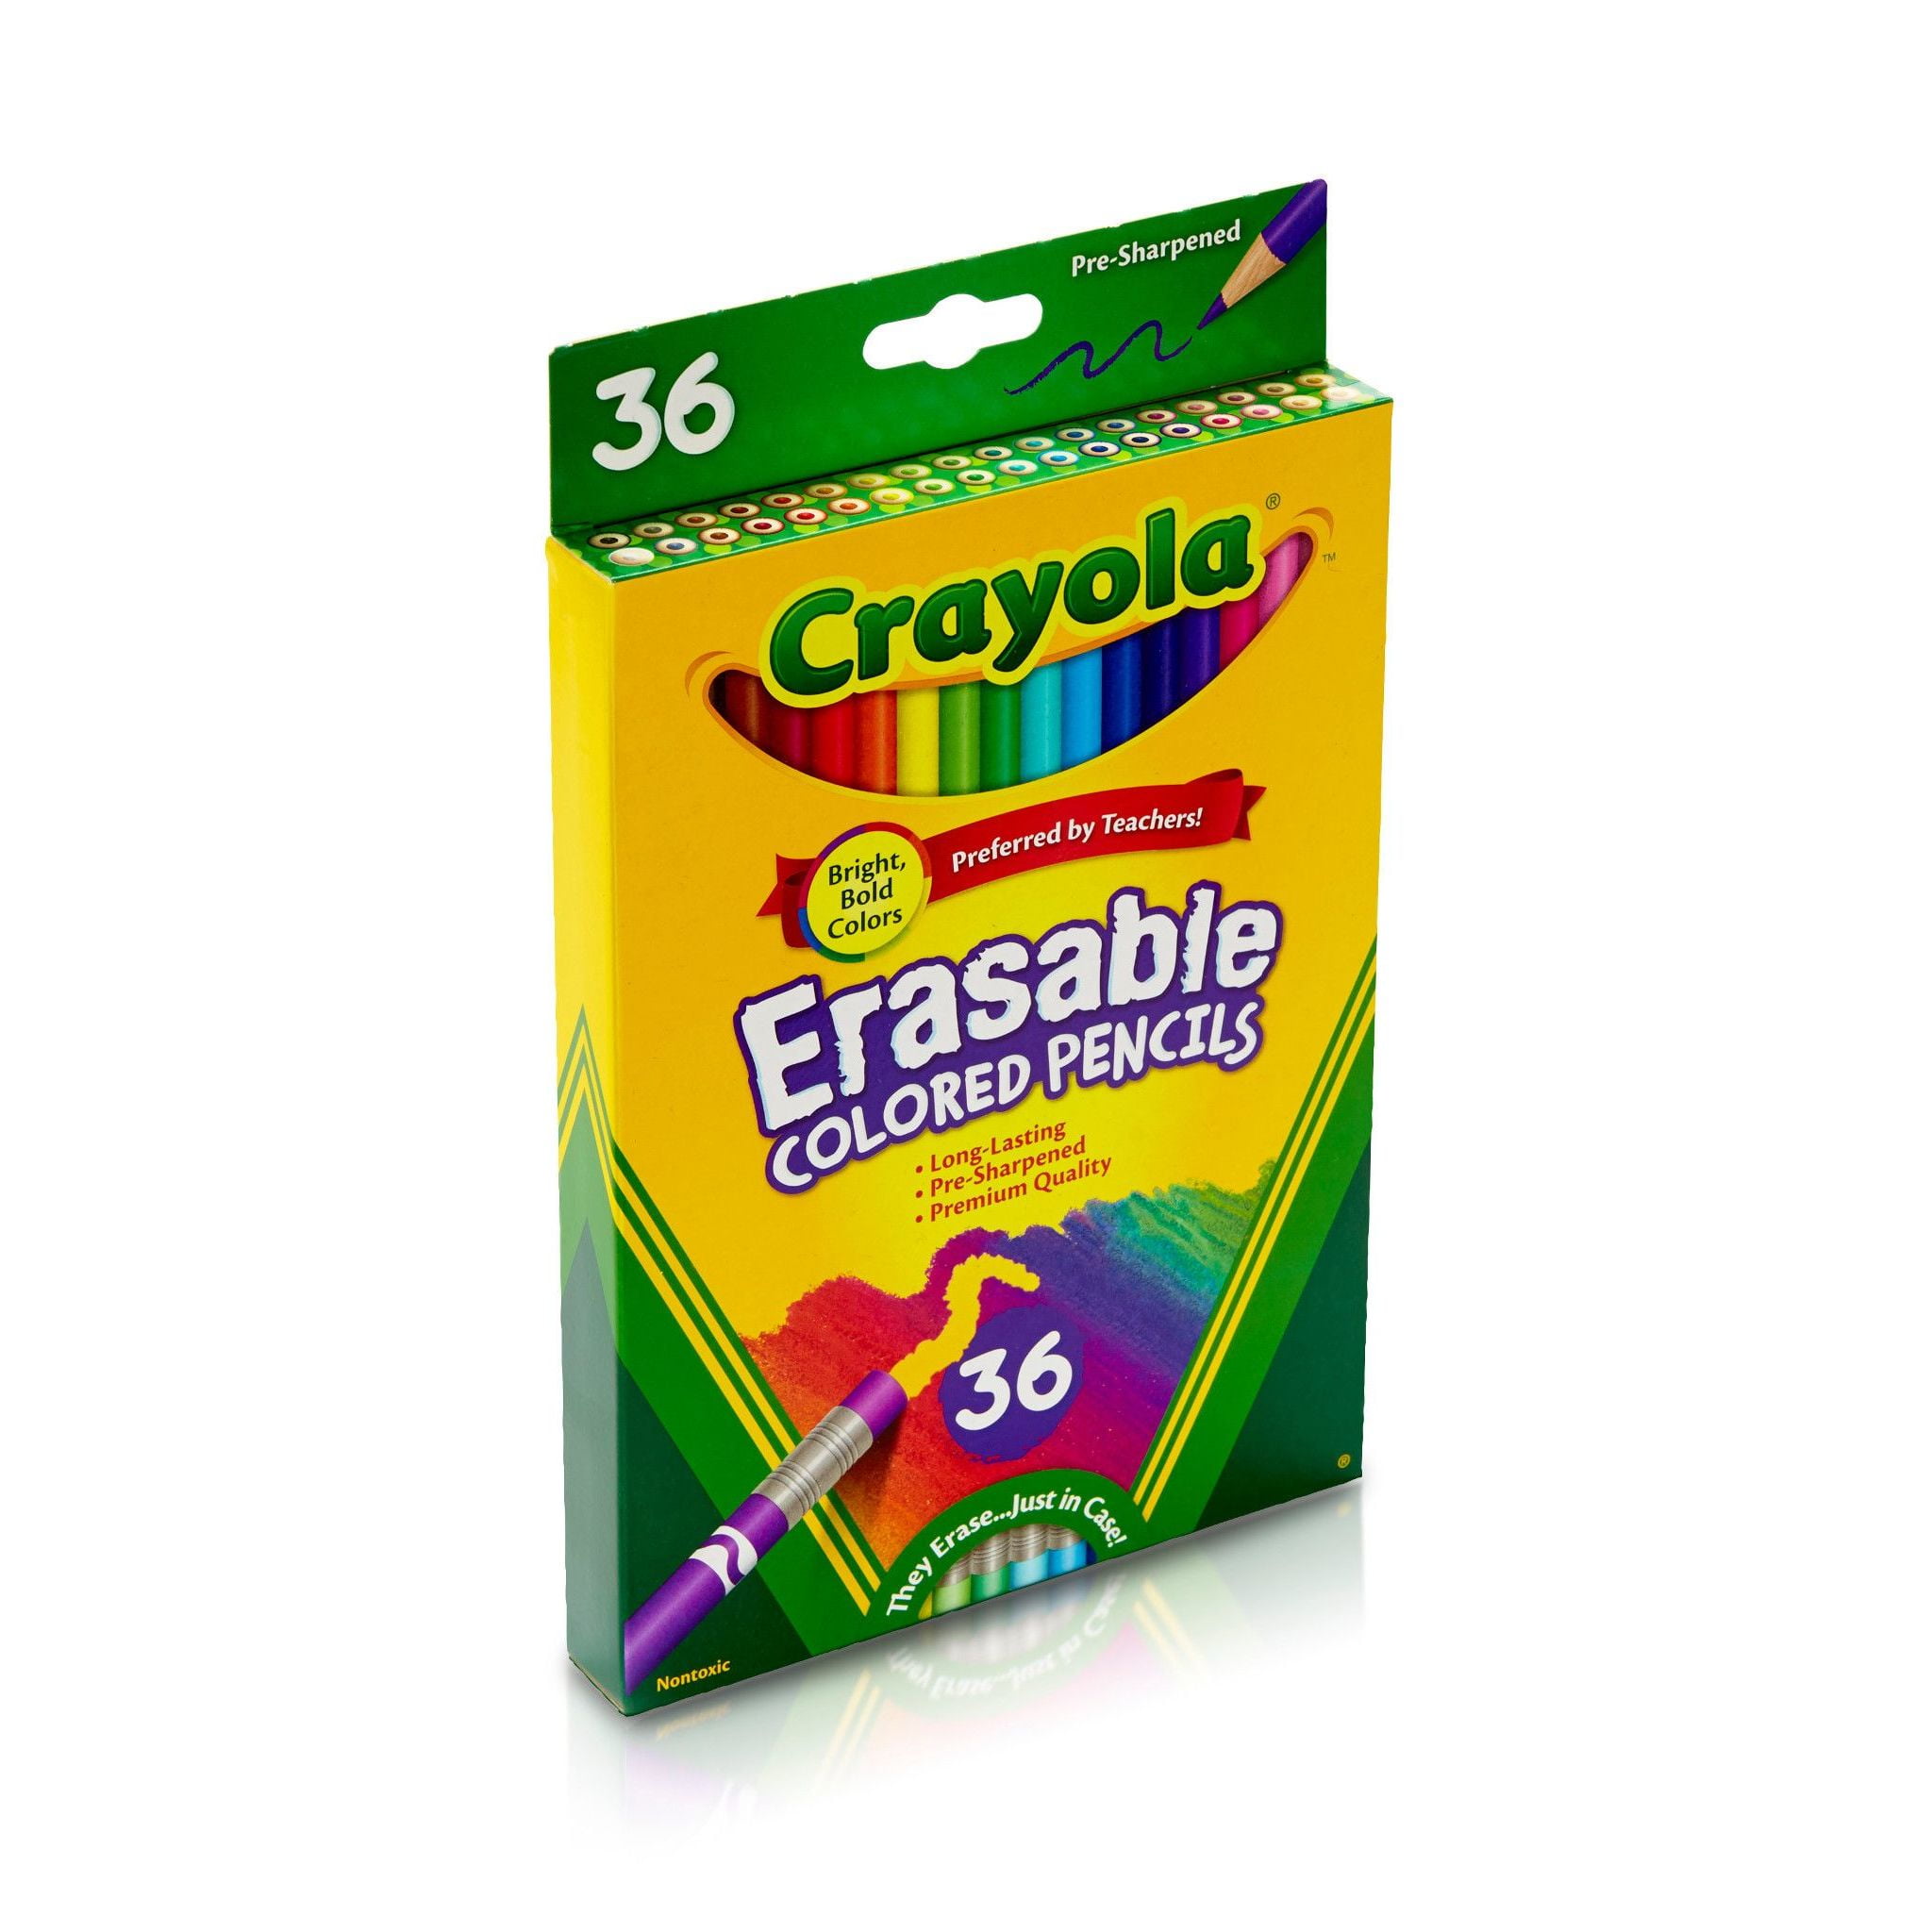 Crayola Dual-Ended Colored Pencils For Shading, 36 Count With